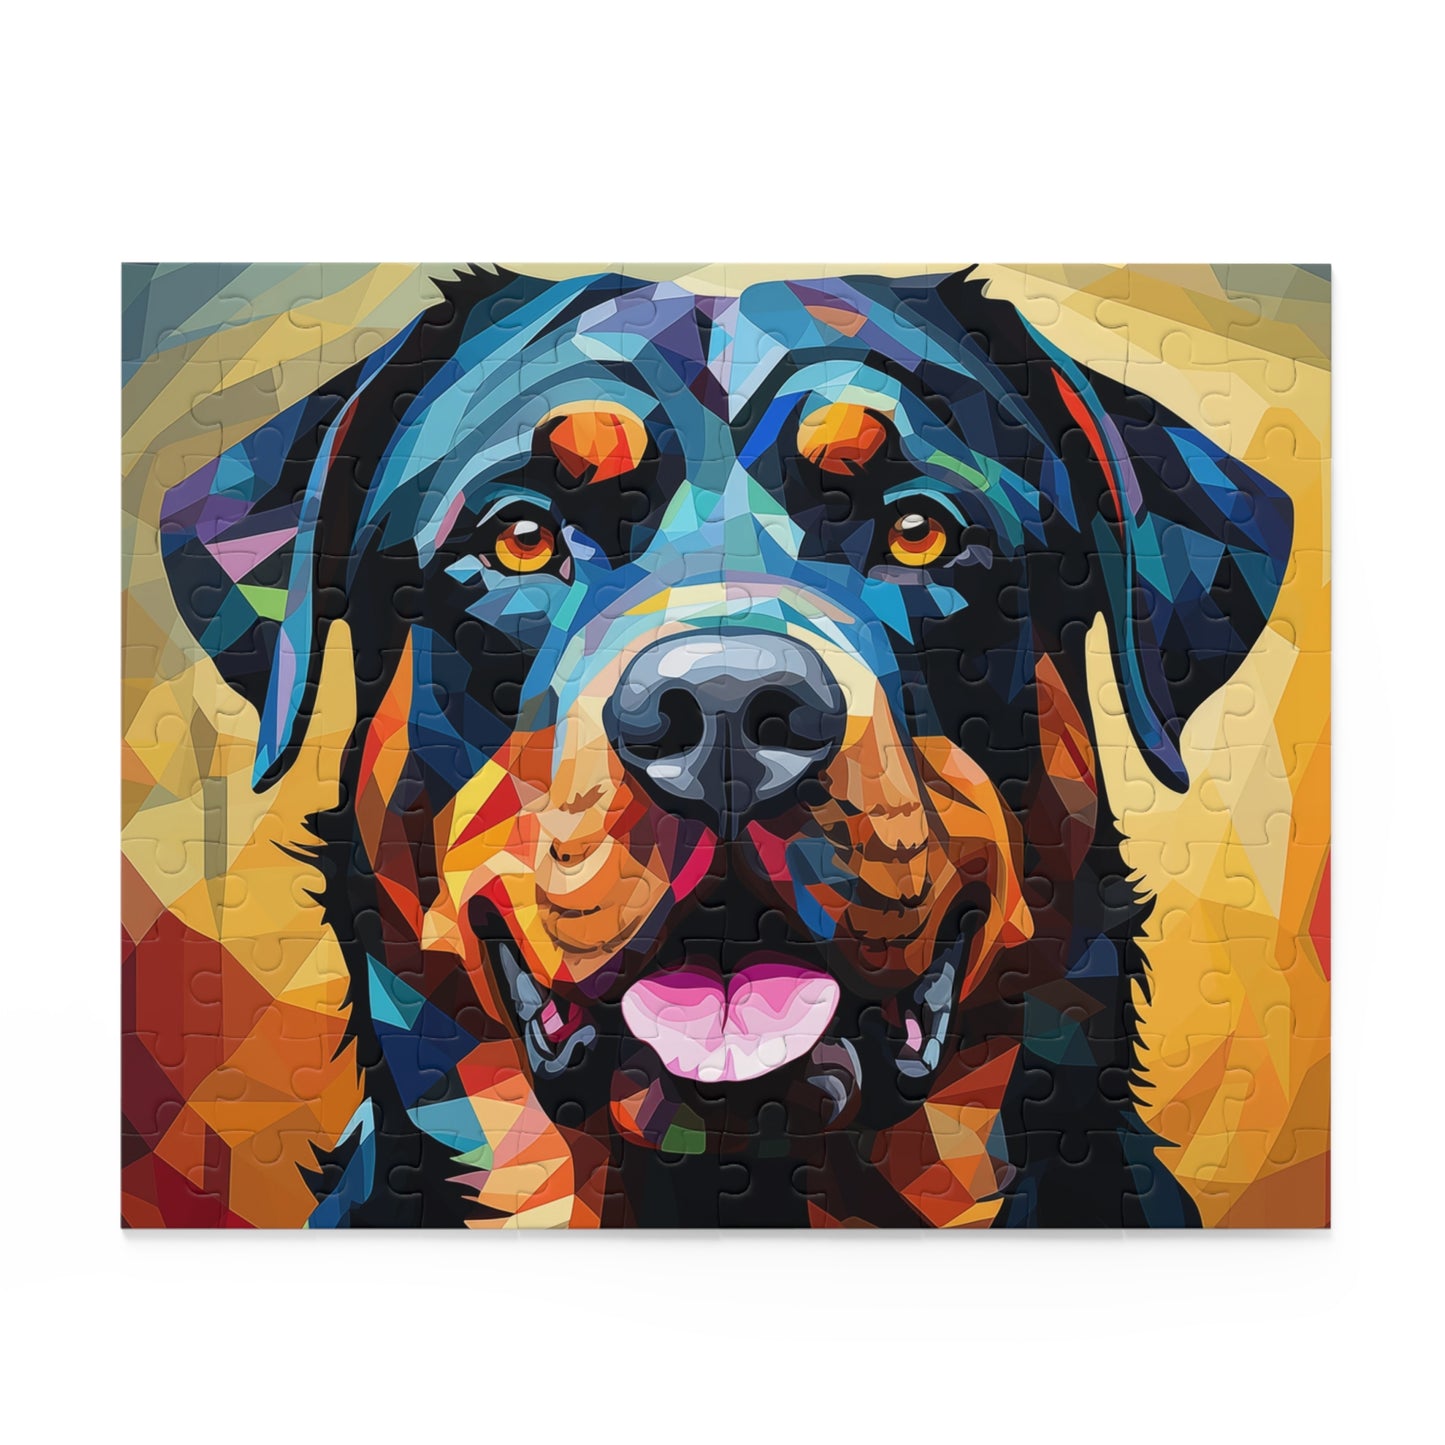 Rottweiler Vibrant Abstract Dog Jigsaw Puzzle Oil Paint Adult Birthday Business Jigsaw Puzzle Gift for Him Funny Humorous Indoor Outdoor Game Gift For Her Online-2